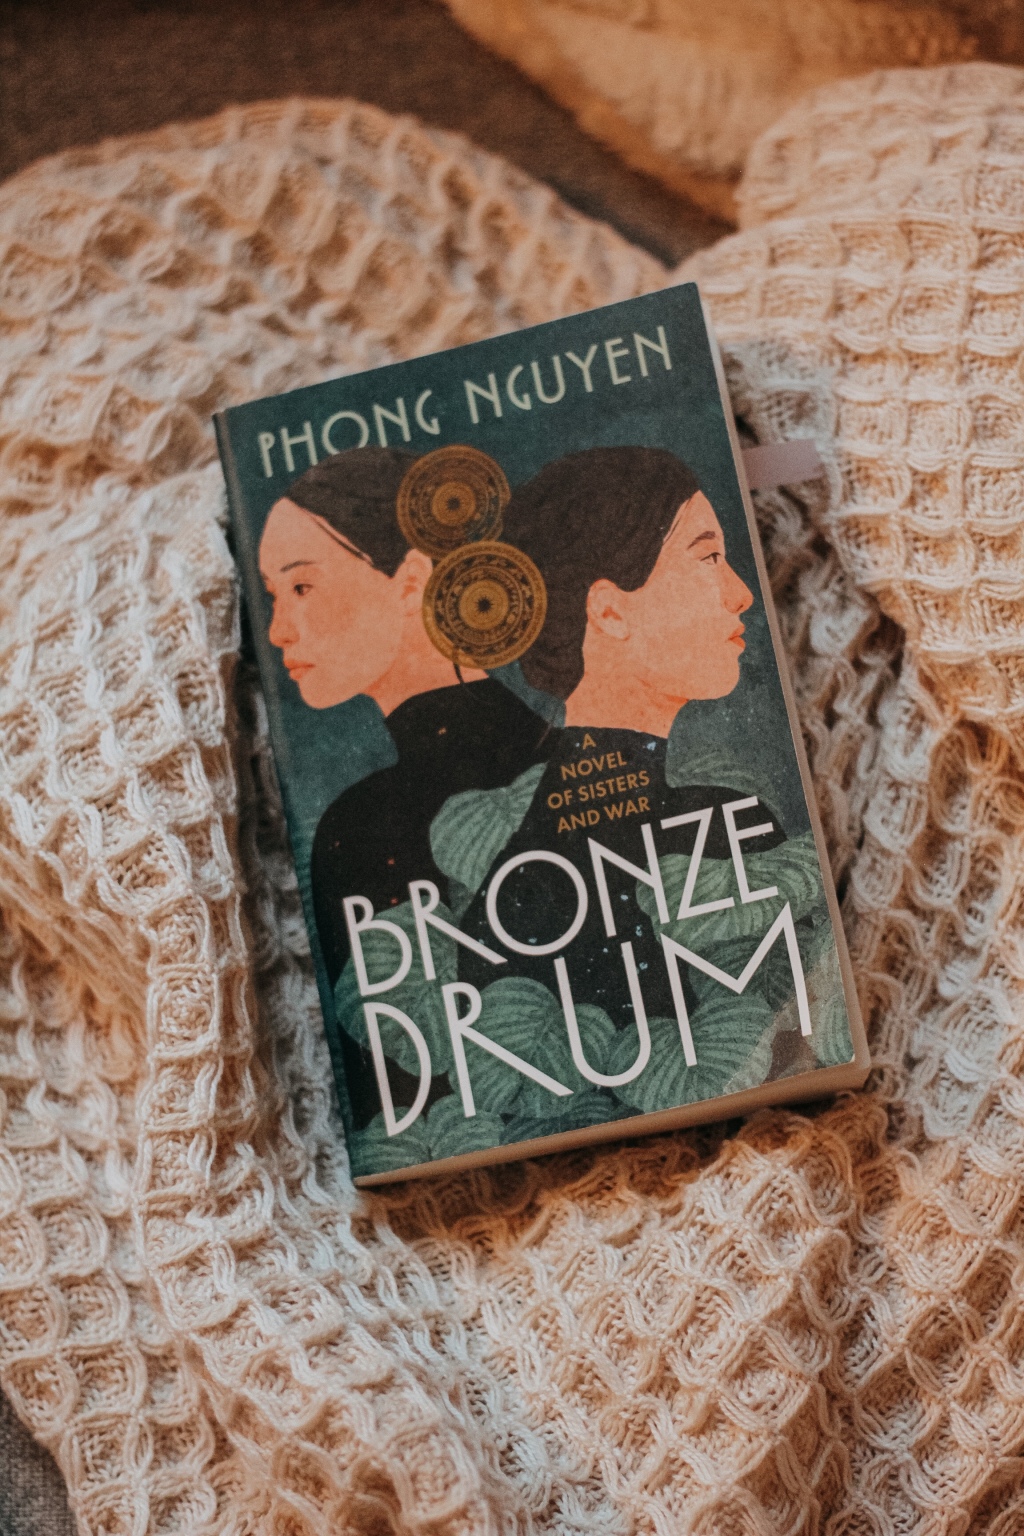 The Bronze Drum (2022) by Phong Nguyen